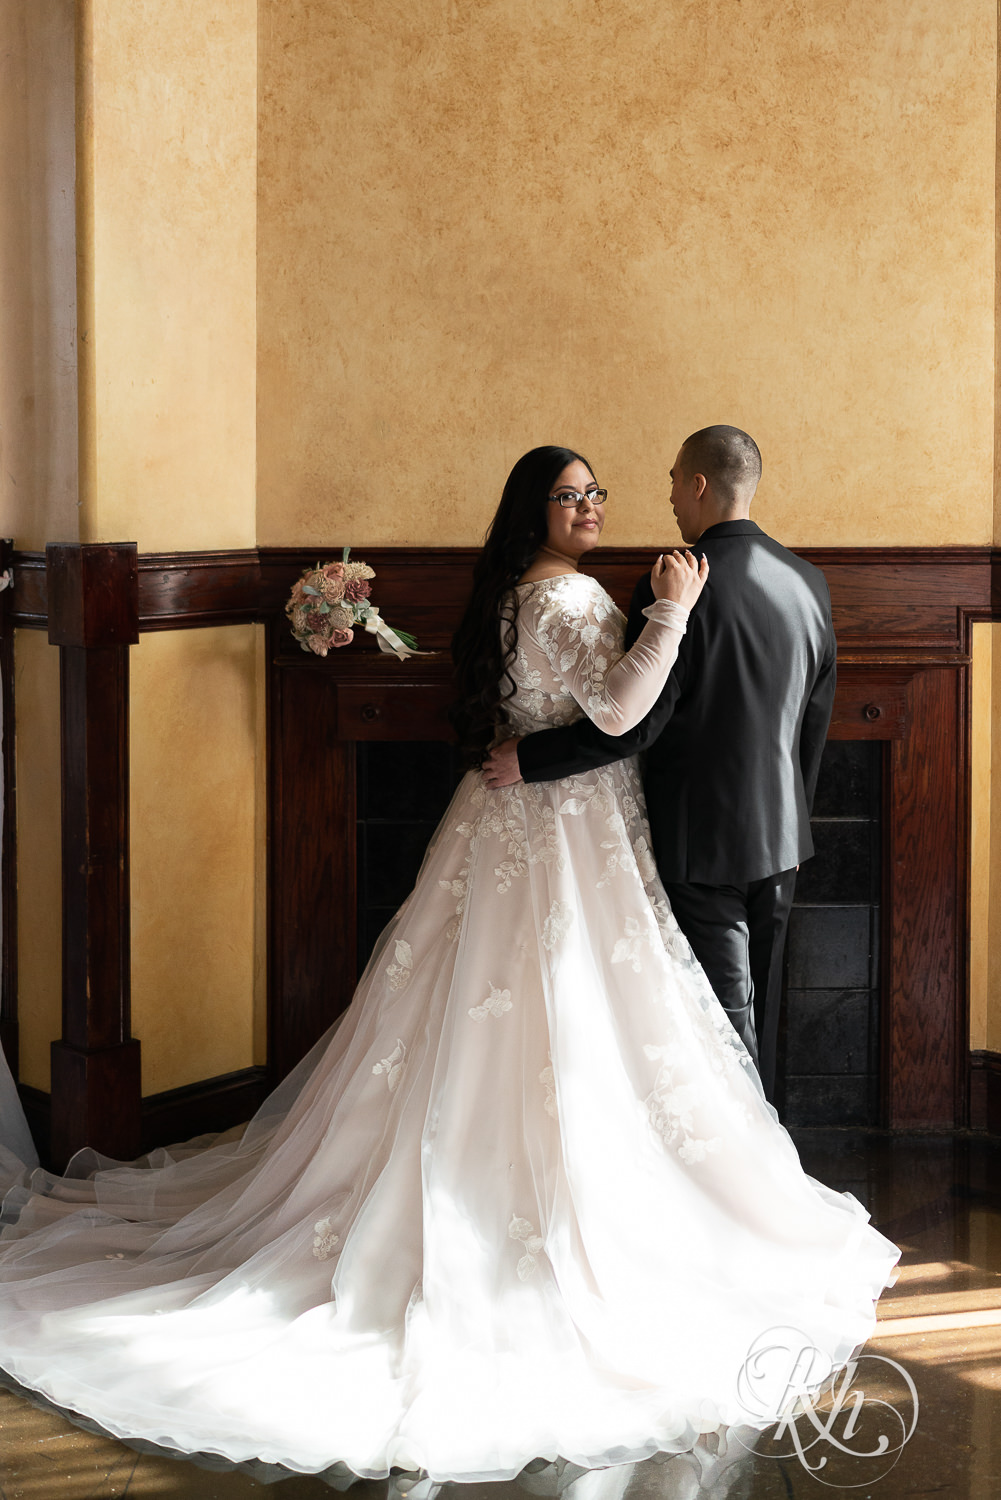 Mexican bride and groom at the Historic Concord Exchange in Saint Paul, Minnesota.